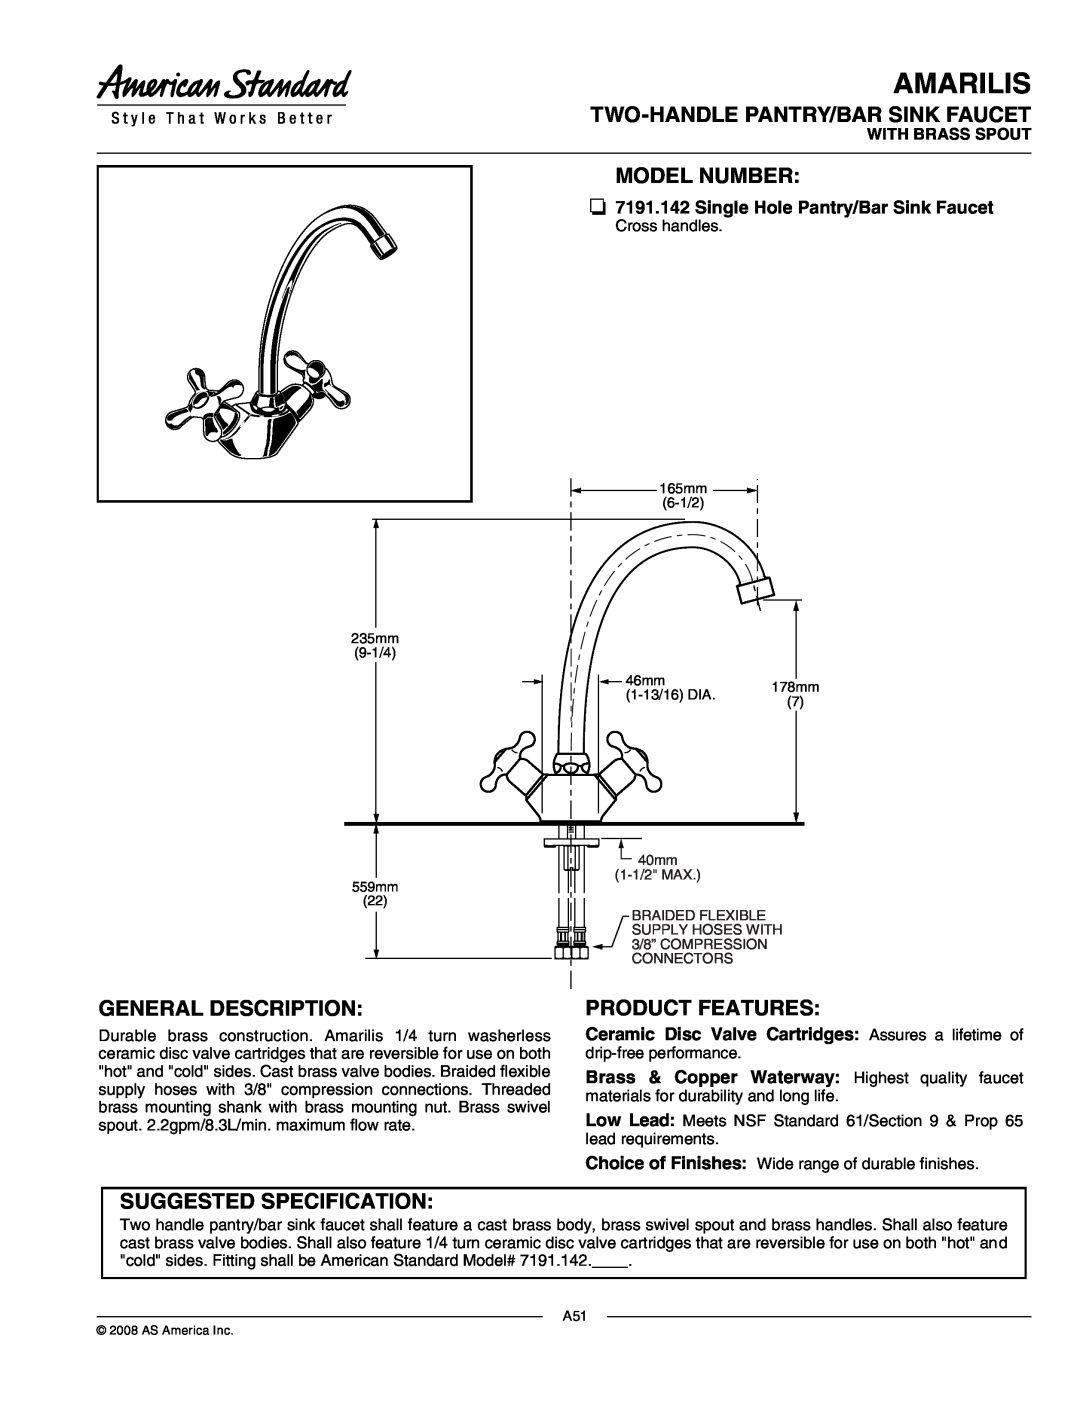 American Standard 7191.142 manual Amarilis, Single Hole Pantry/Bar Sink Faucet, With Brass Spout, Model Number 